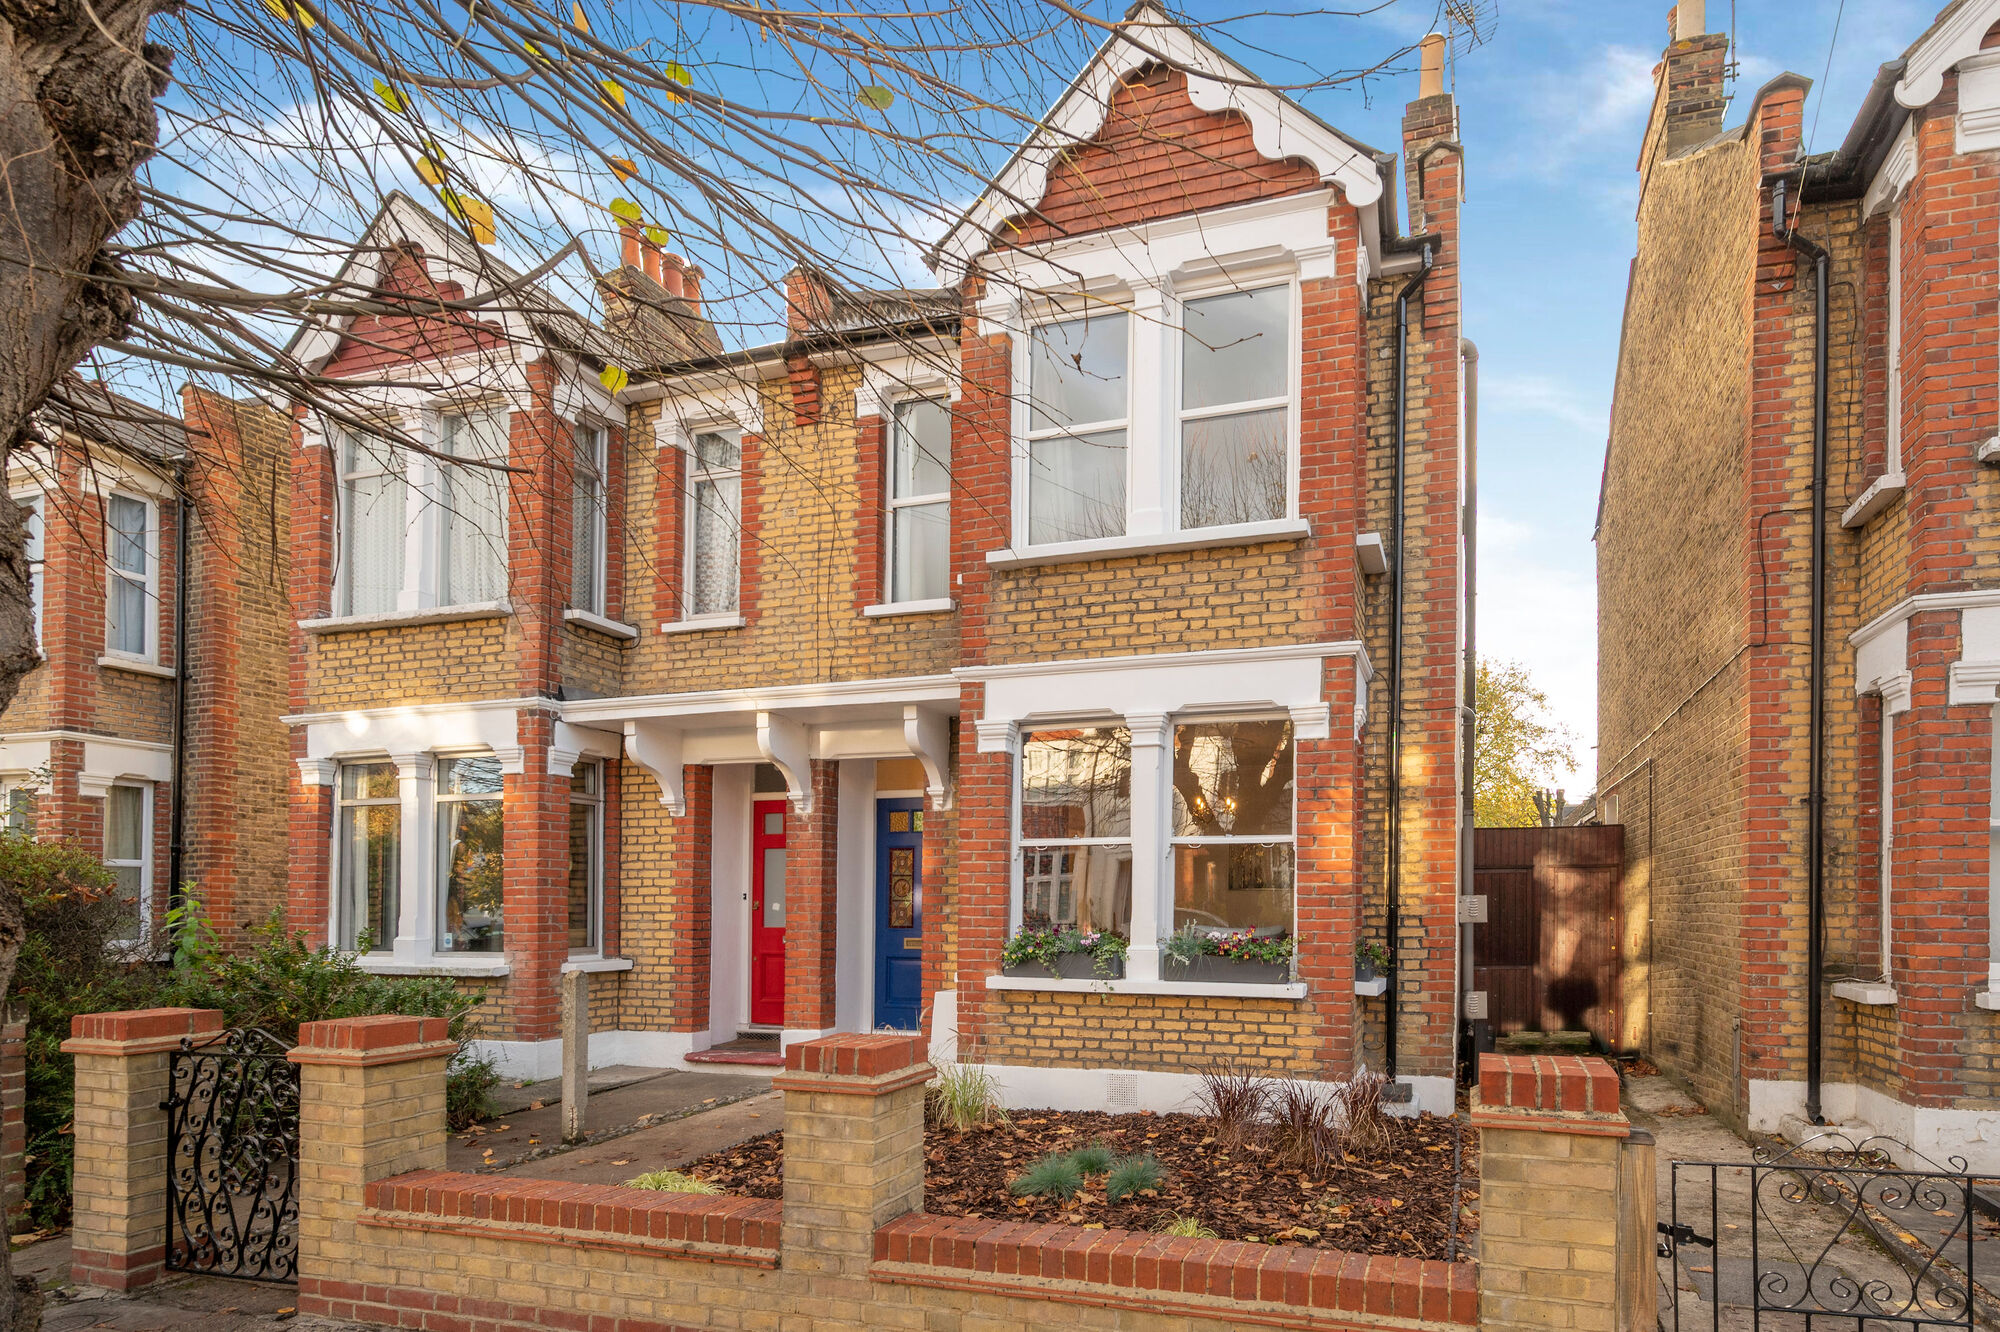 4 bedroom  house for sale Rayleigh Road, Wimbledon, SW19, main image